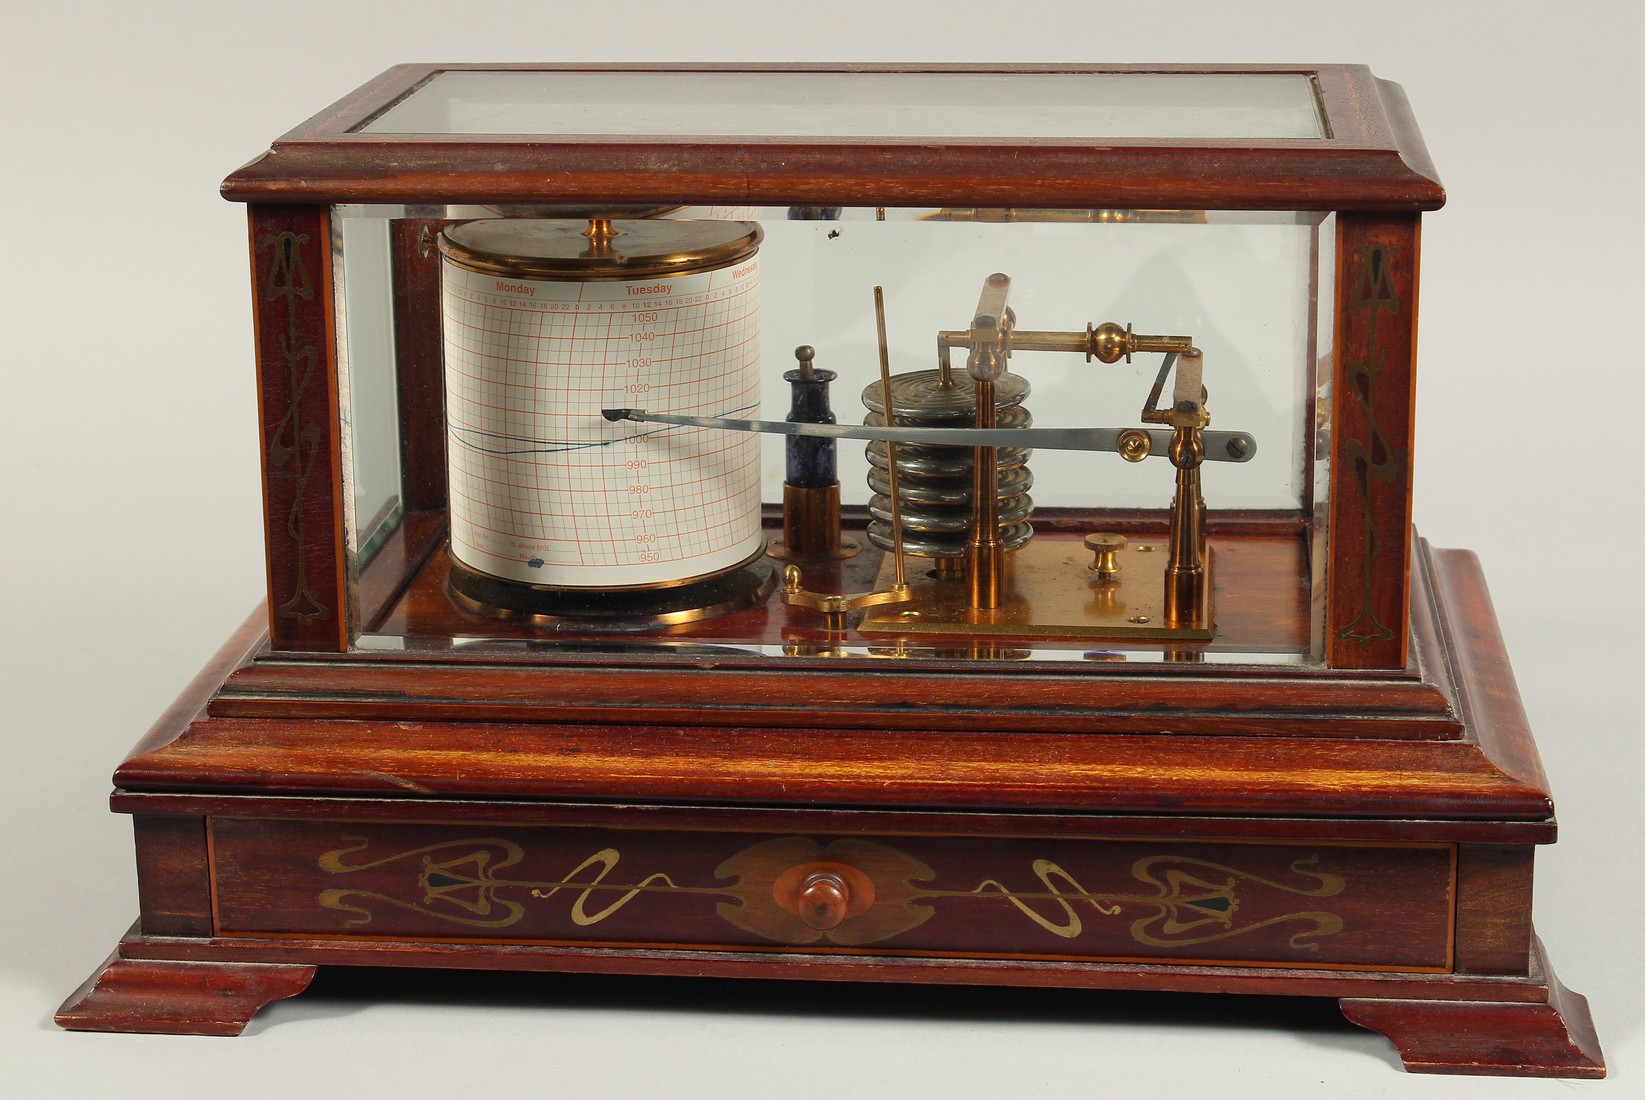 A VERY GOOD BAROGRAPH in a glass and mahogany case with spare charts and ink